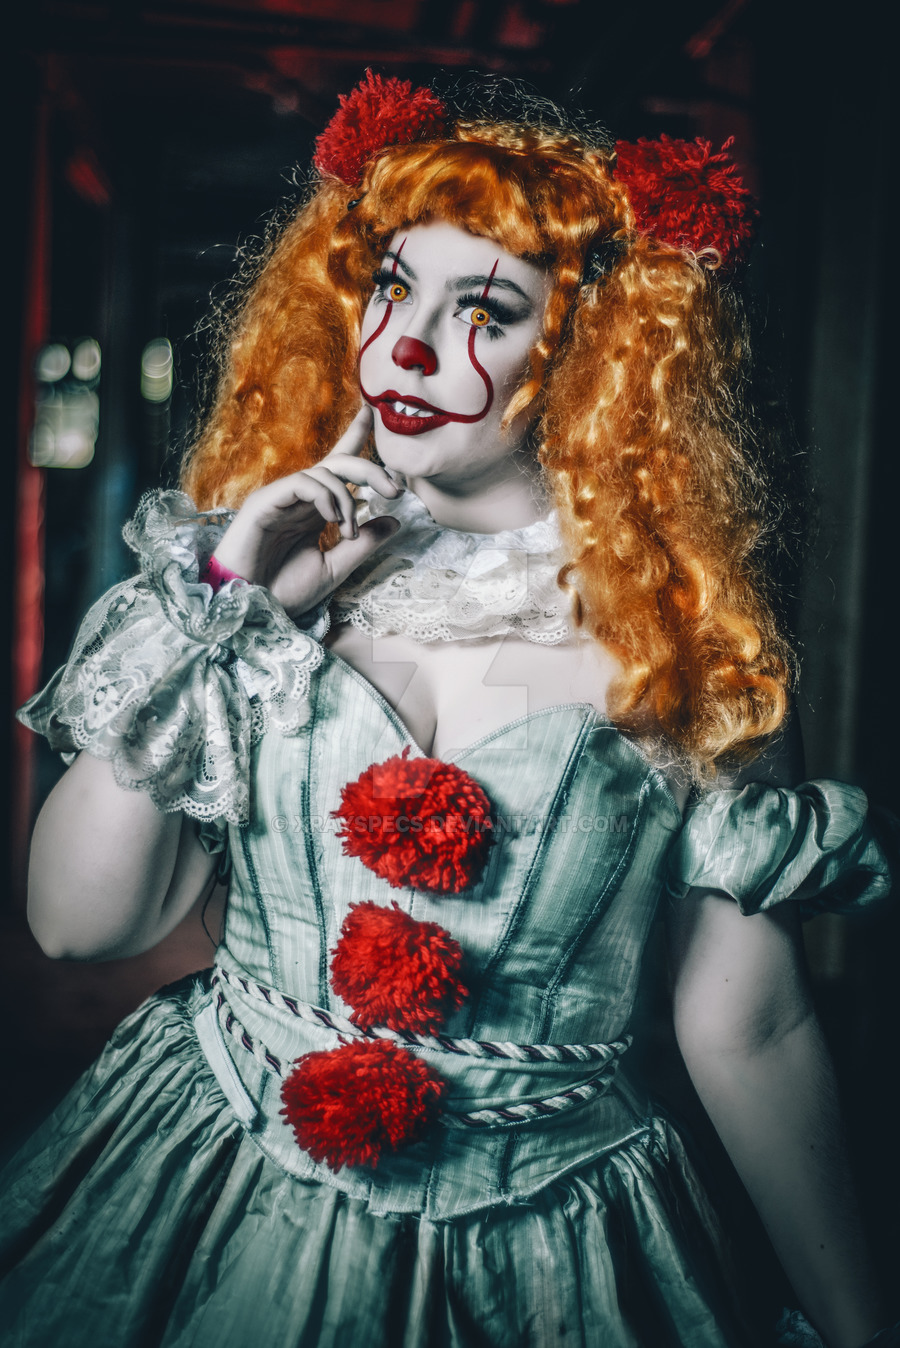 te_elle_cosplay_as_pennywise_from_it_by_xrayspecs-dd5l66t